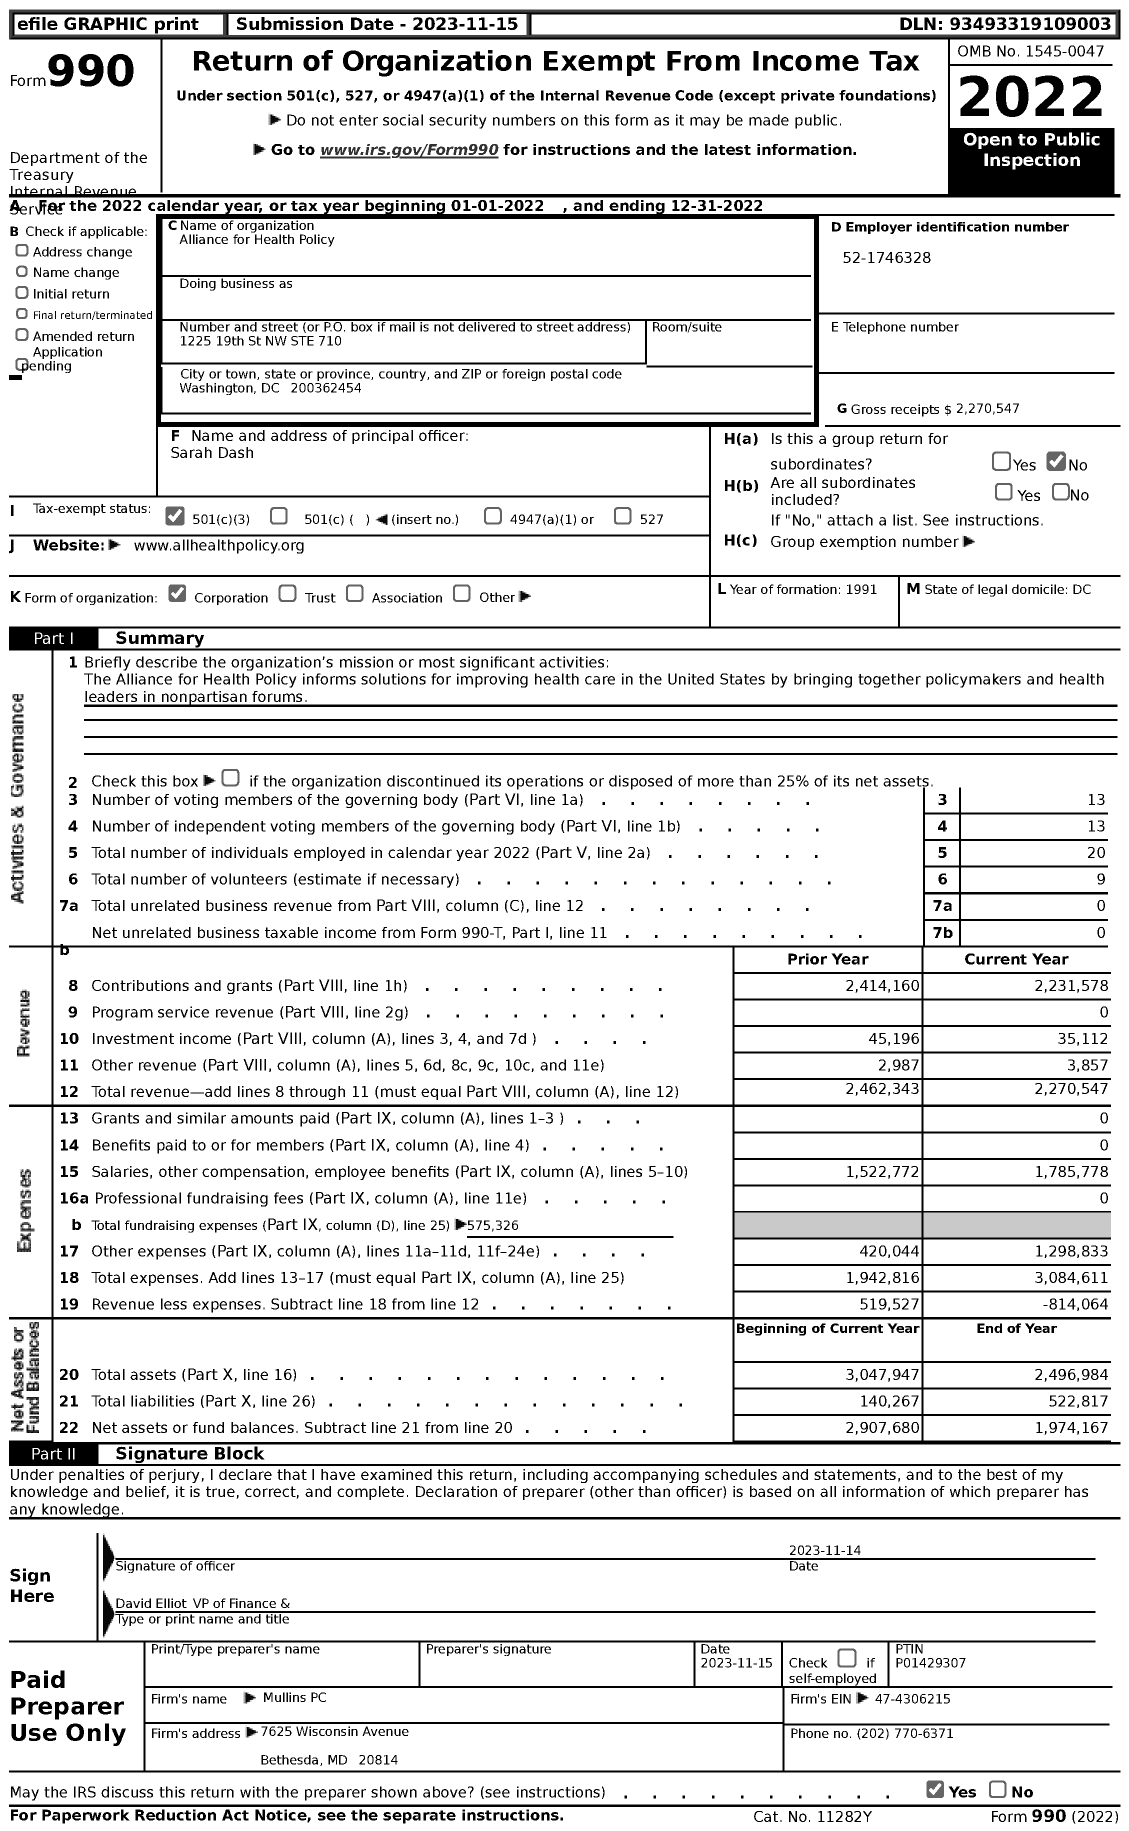 Image of first page of 2022 Form 990 for Alliance for Health Policy